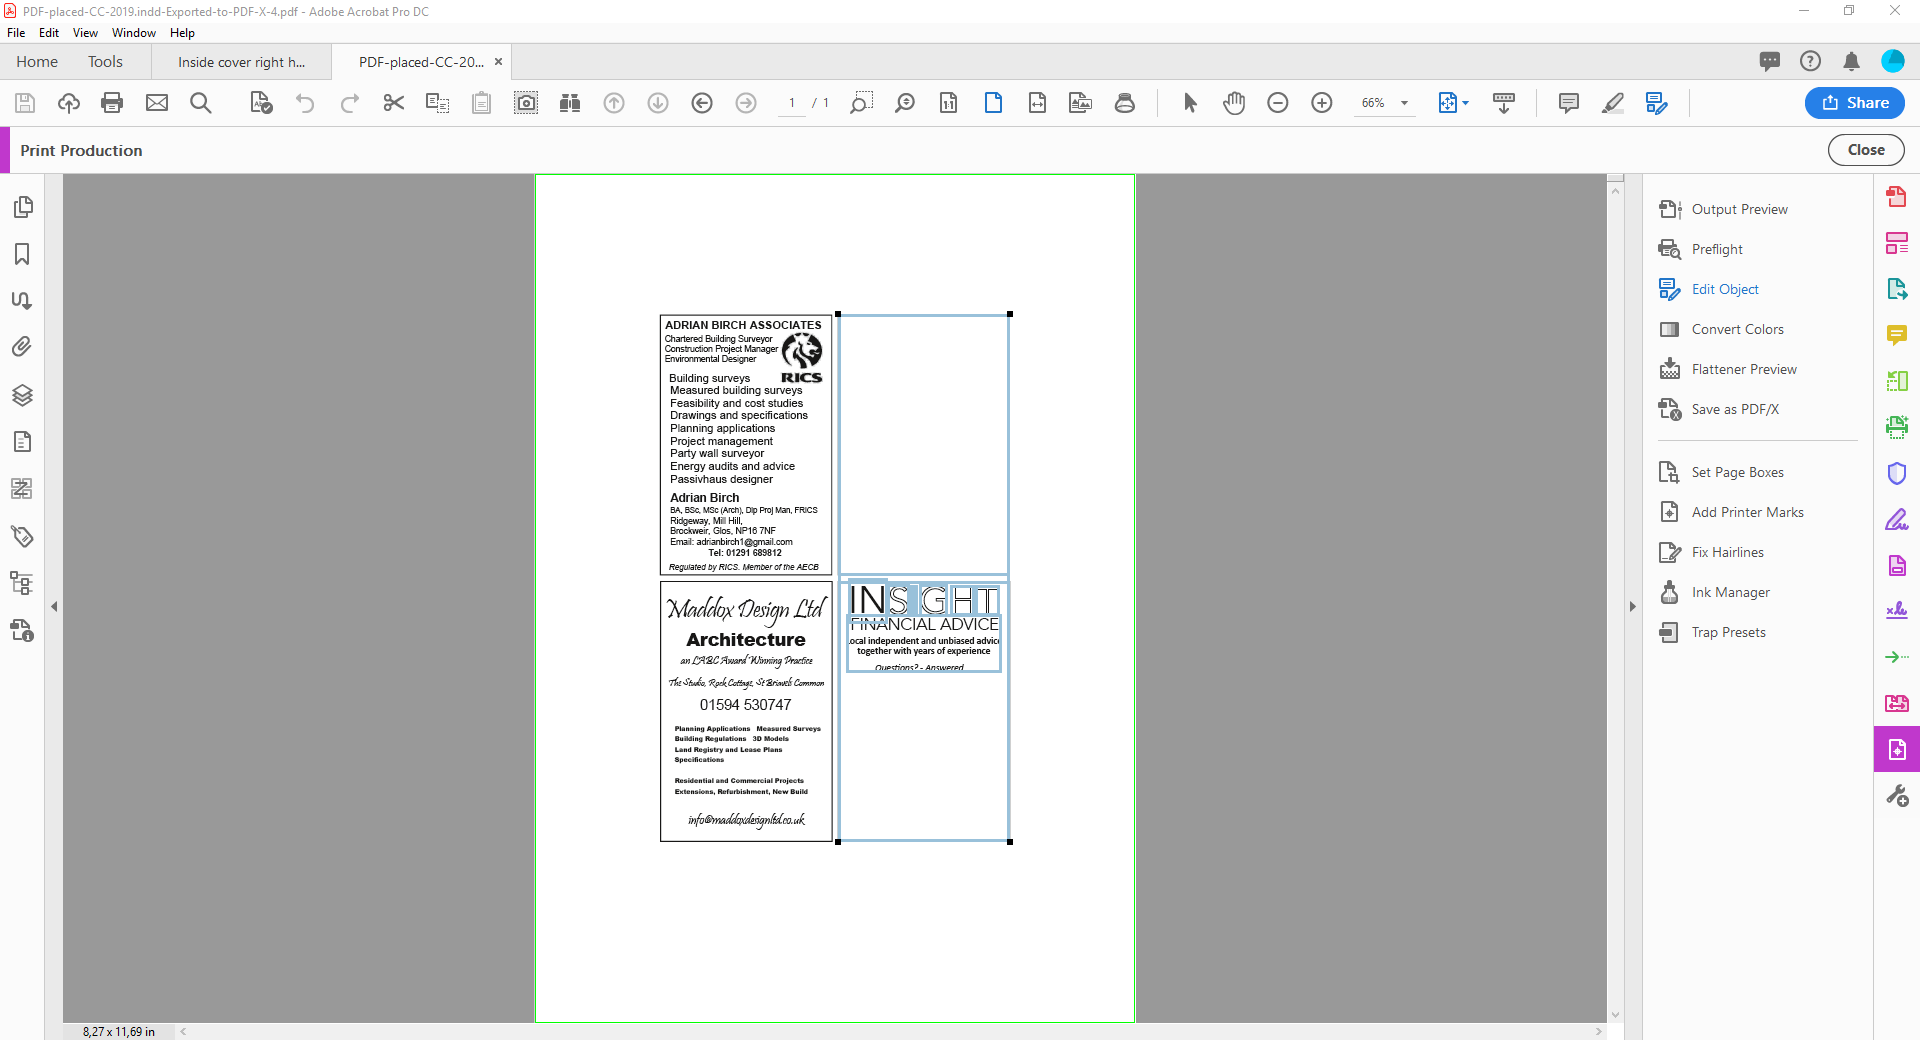 Exported-PDF-X-4-from-InDesign-CC-2019-Opened-in-Acrobat-1.PNG